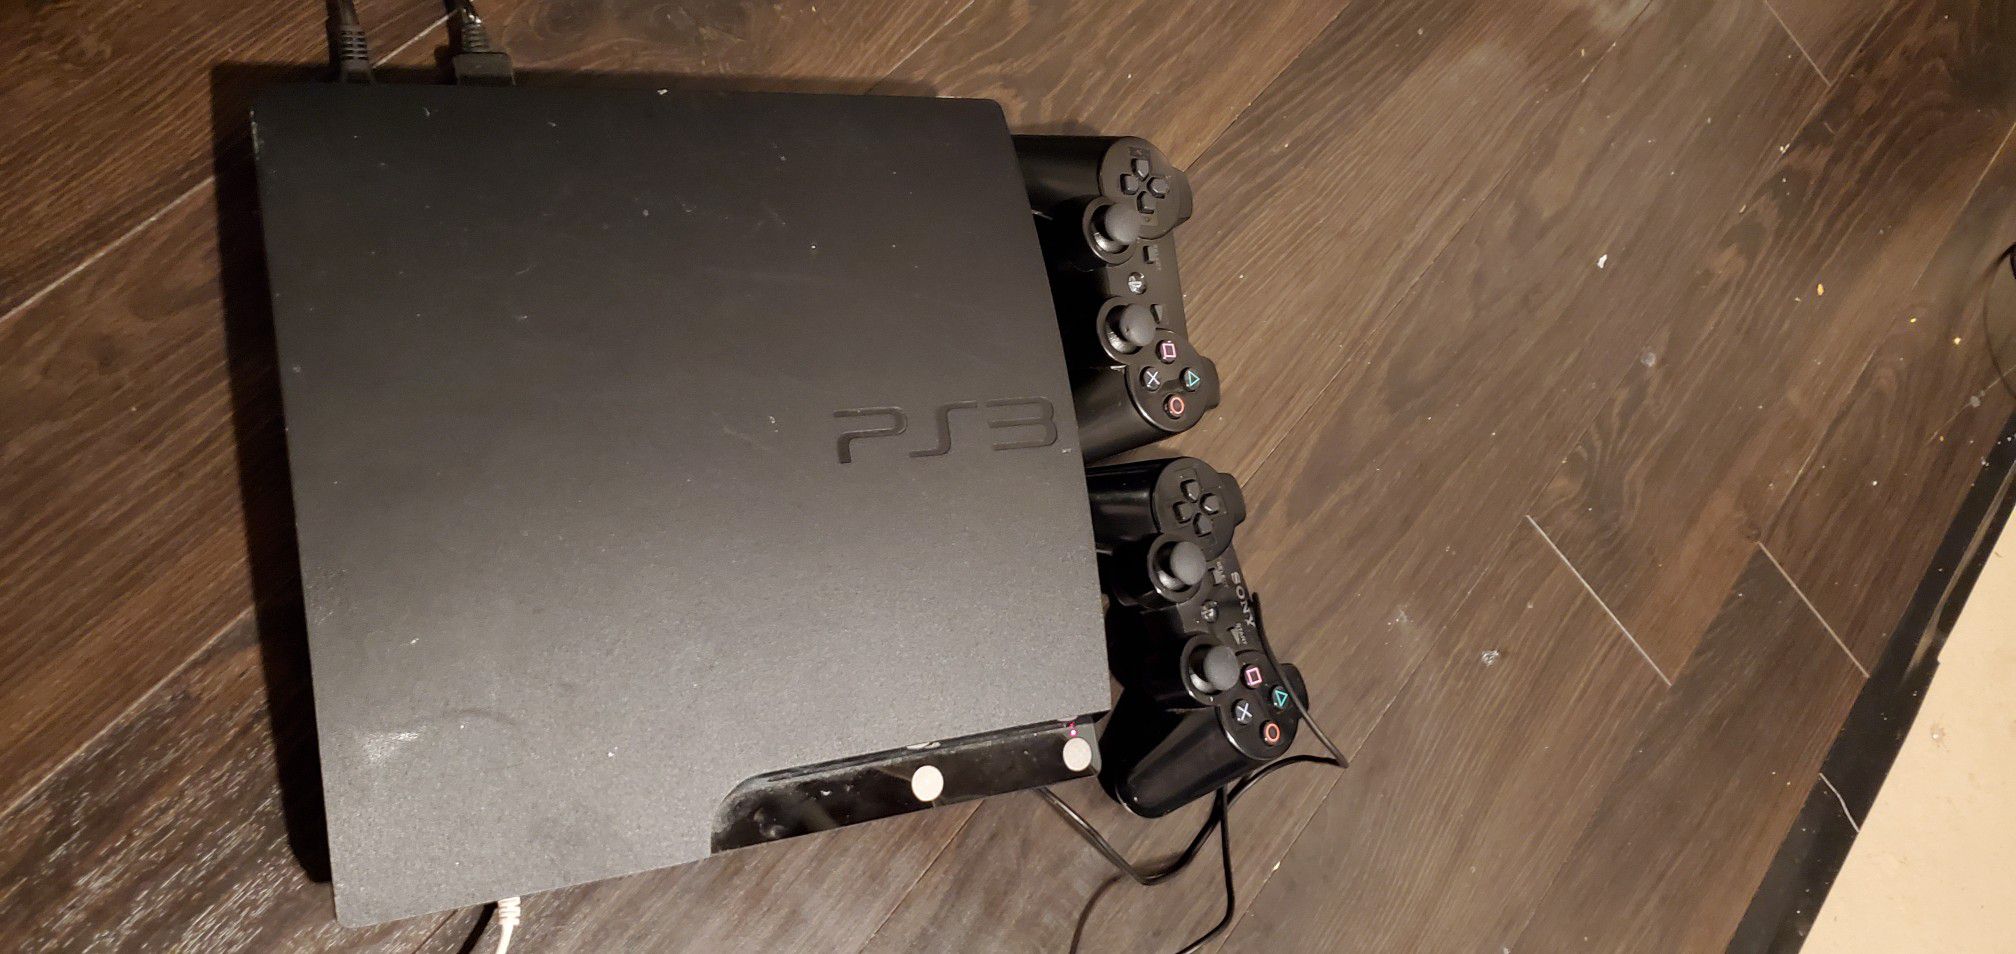 Ps3 with 2 controllers